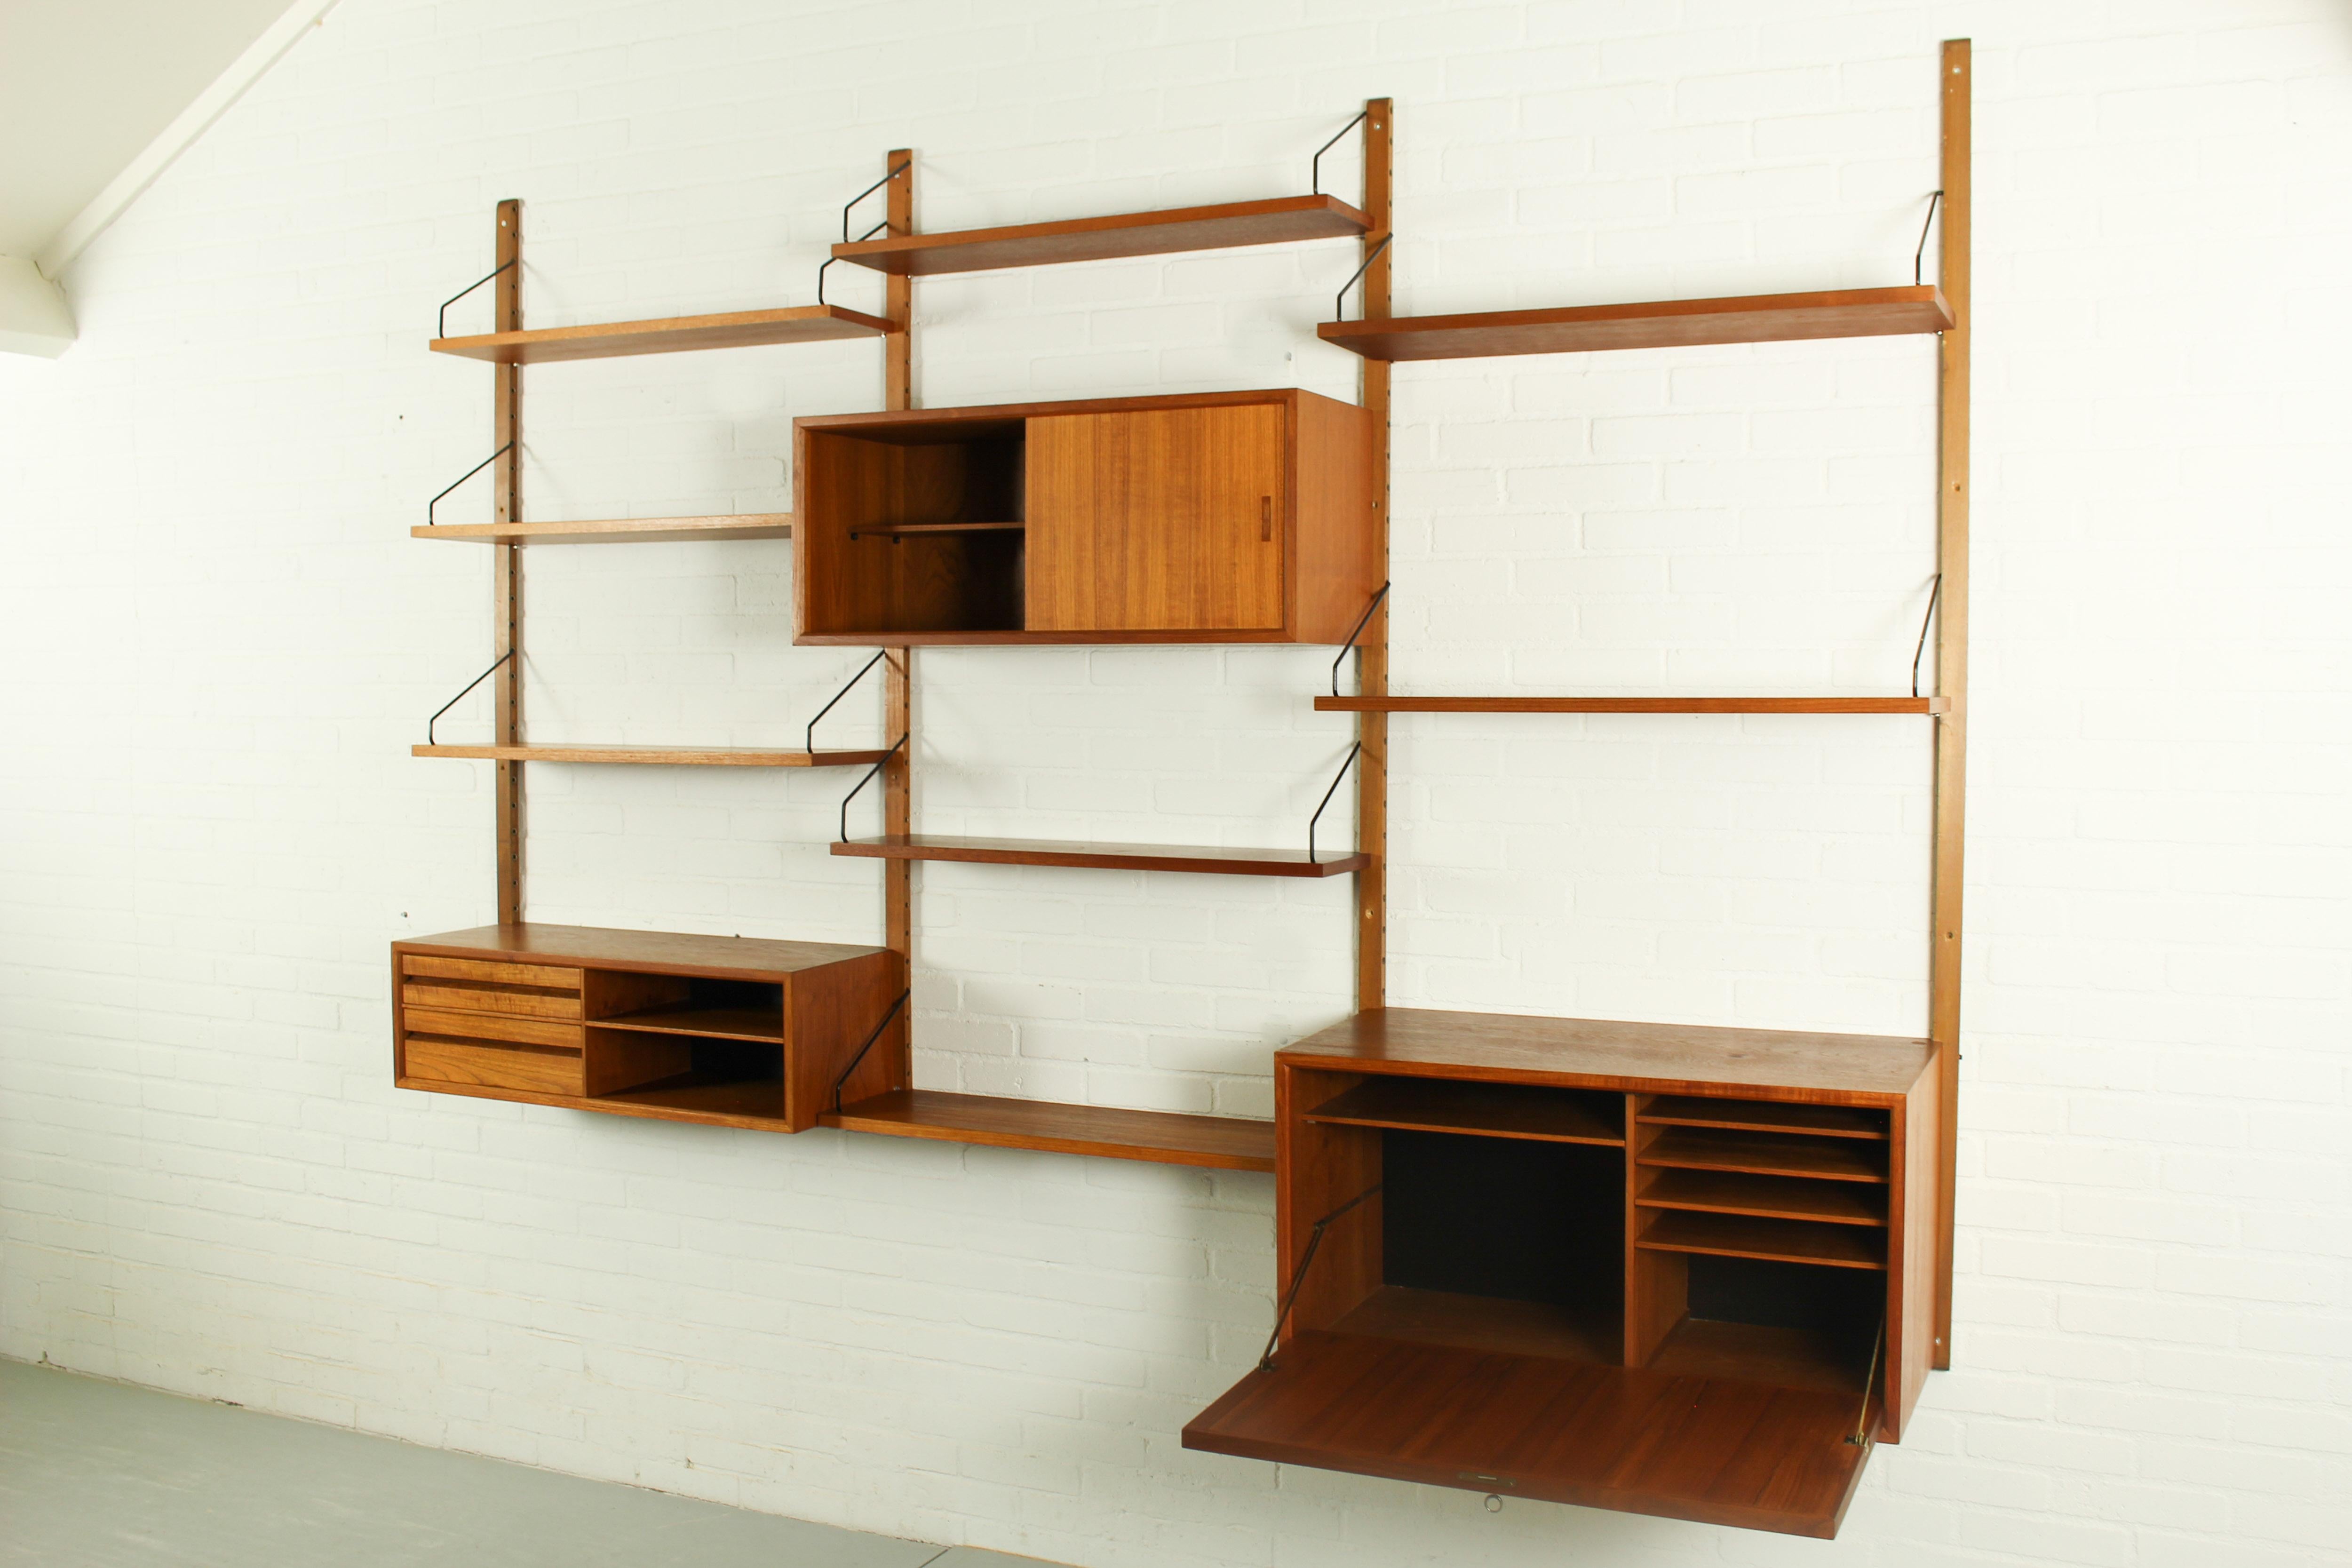 Shelving system in teak designed by Poul Cadovius for Cado, Denmark. This 